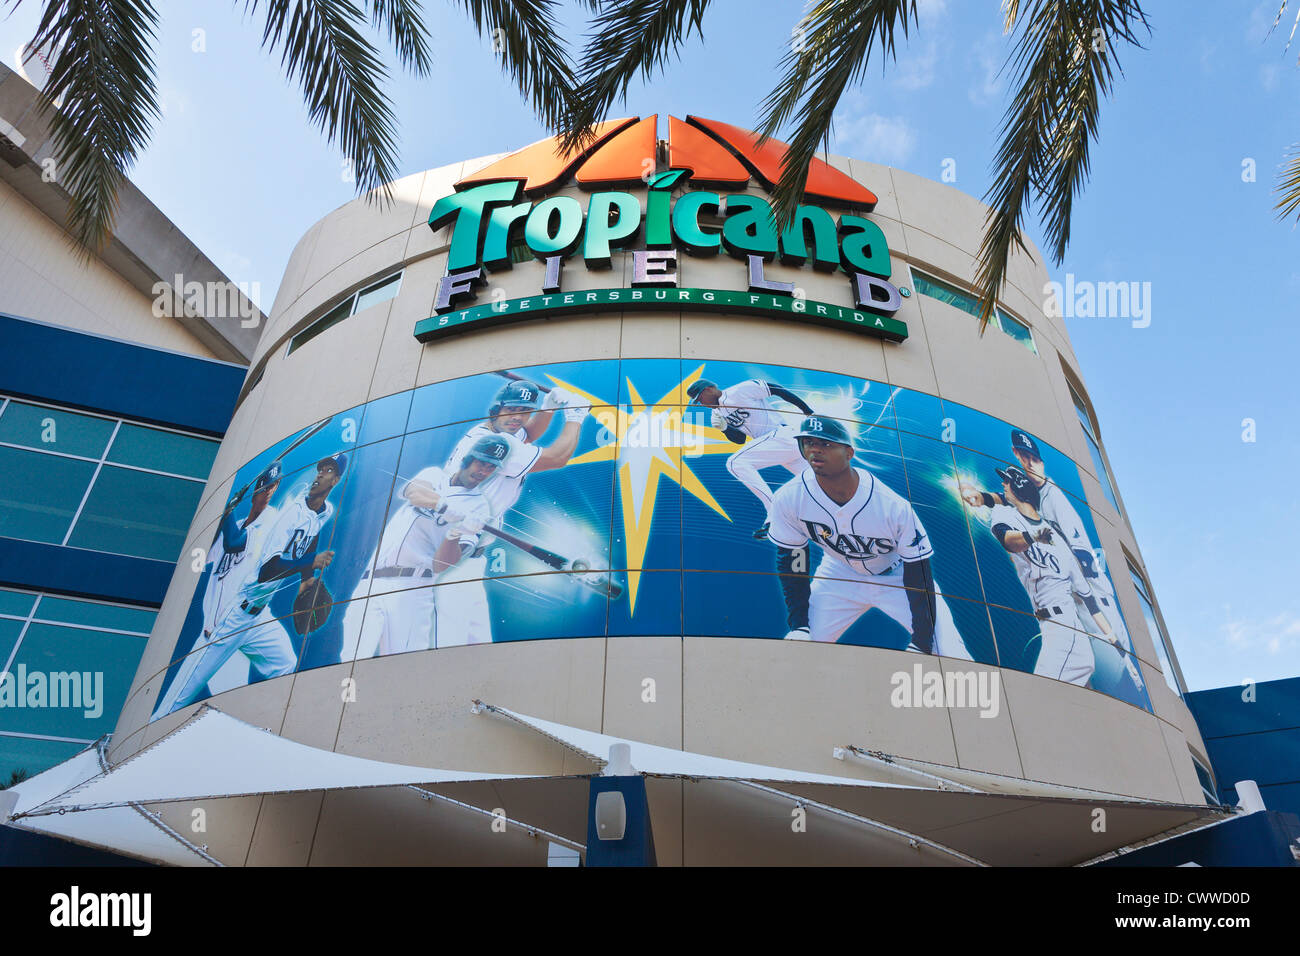 Logo and display above entrance to Tropicana Field Stadium in St. Petersburg, Florida Stock Photo